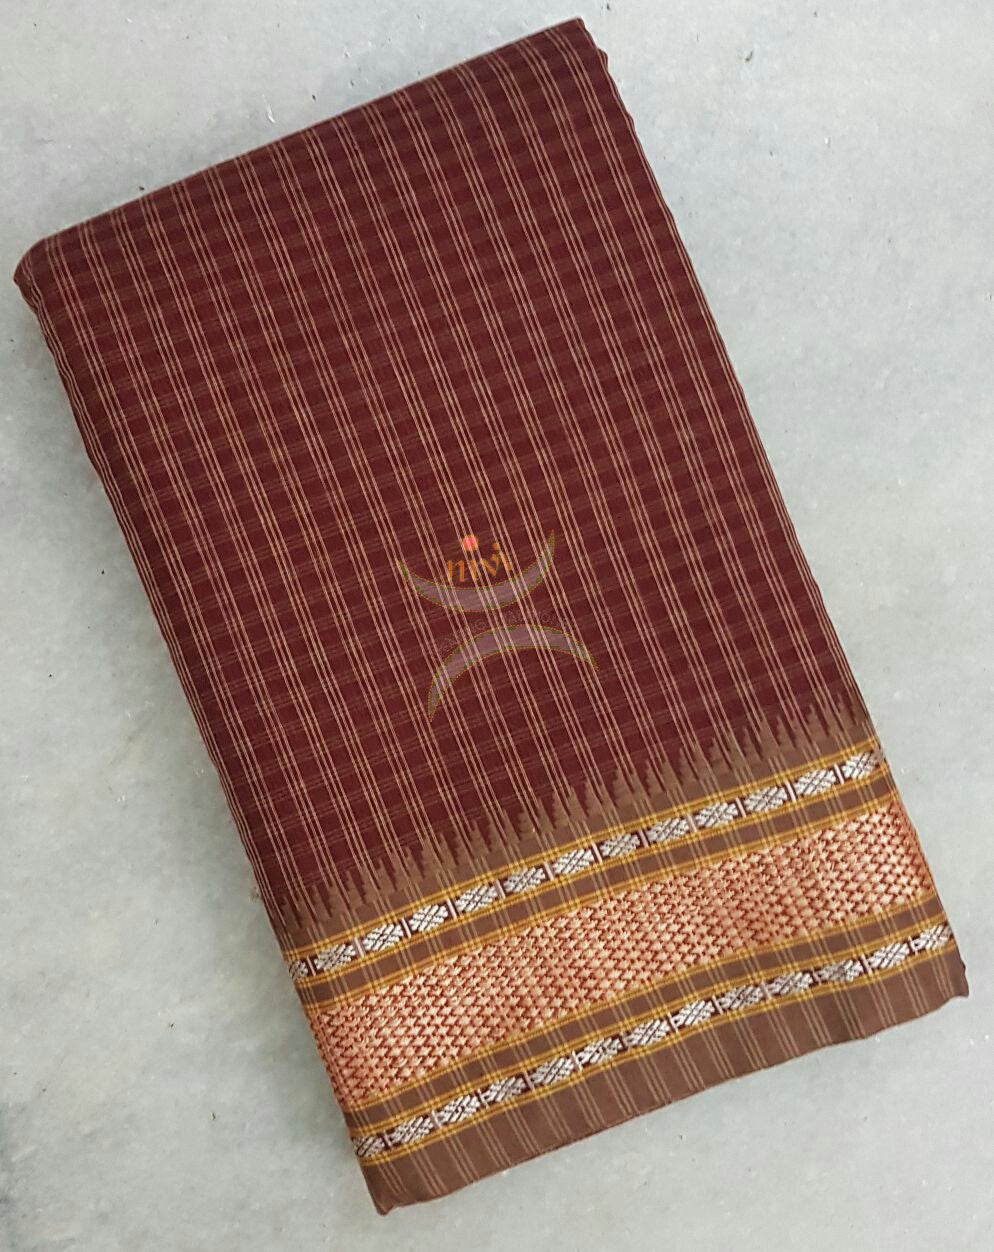 Kota cotton checks with traditional border and pallu. Saree comes with running blouse